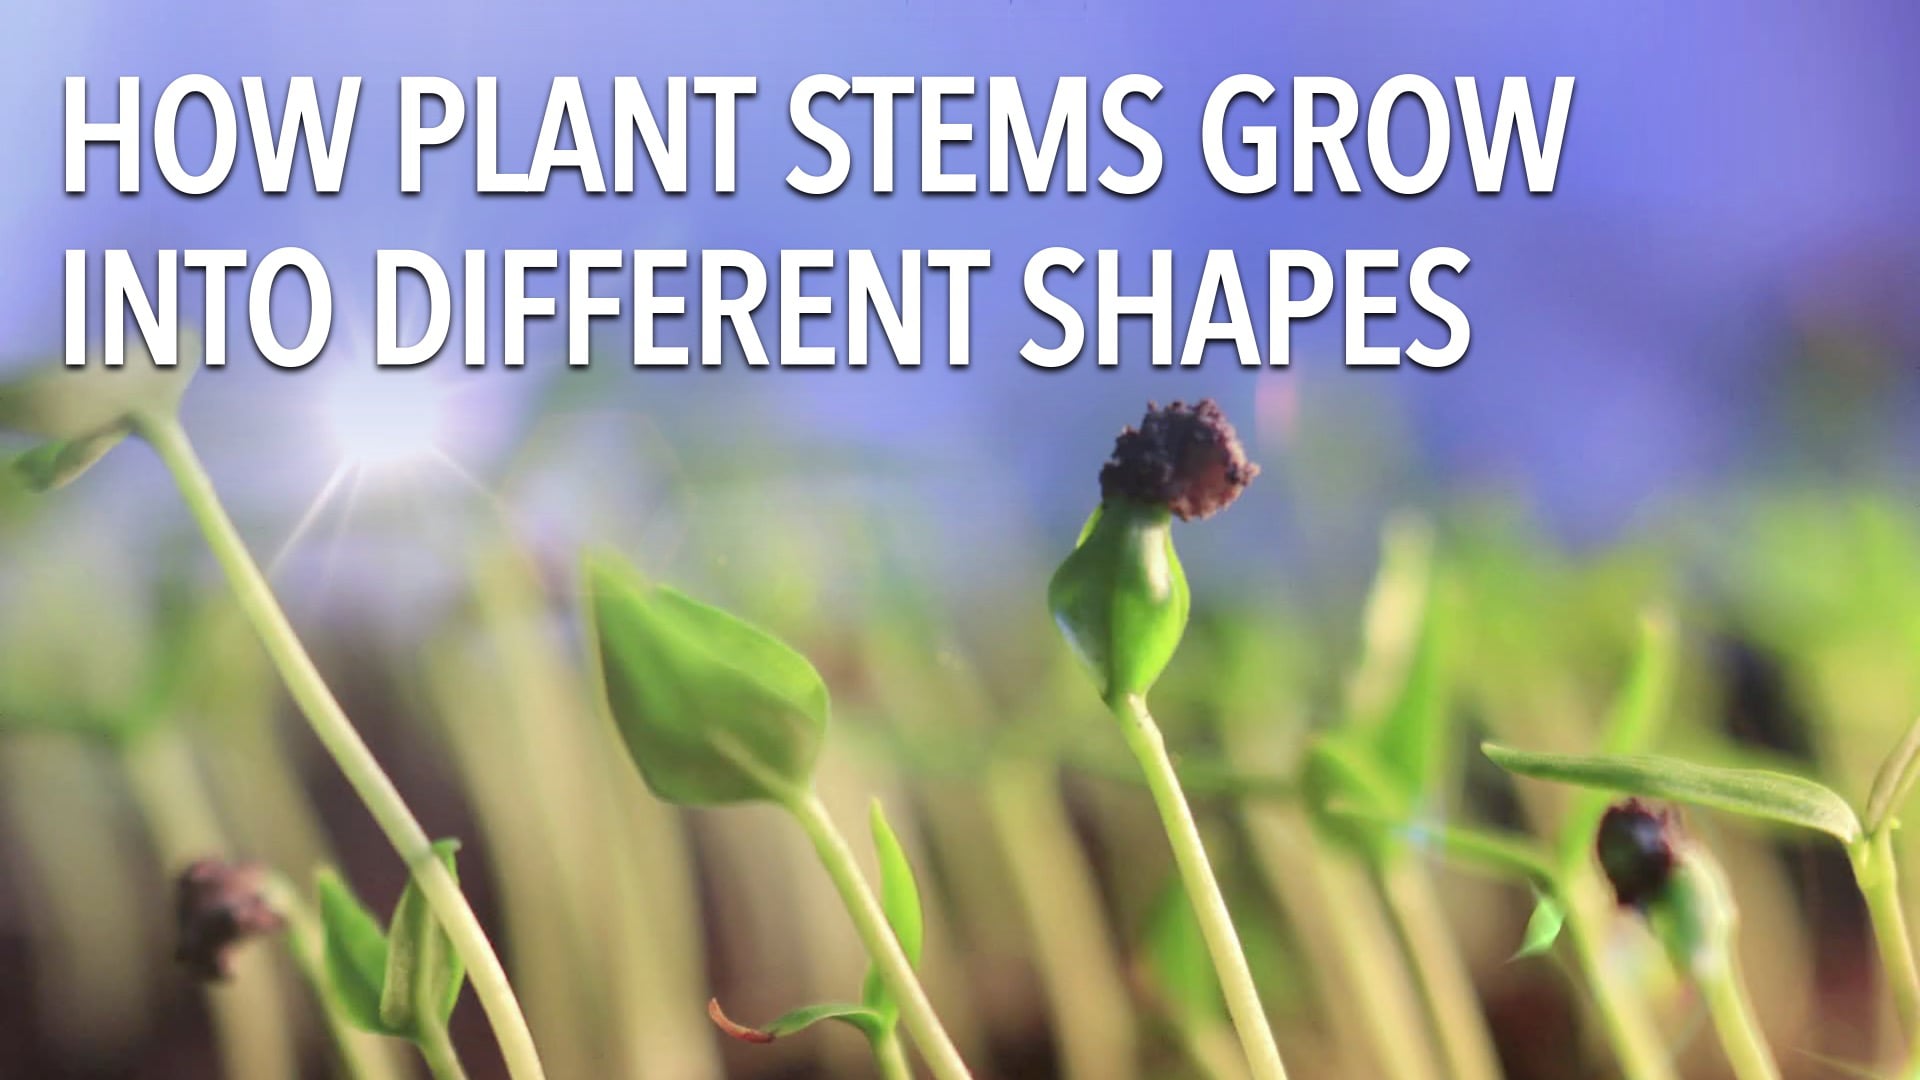 How plant stems grow into different shapes